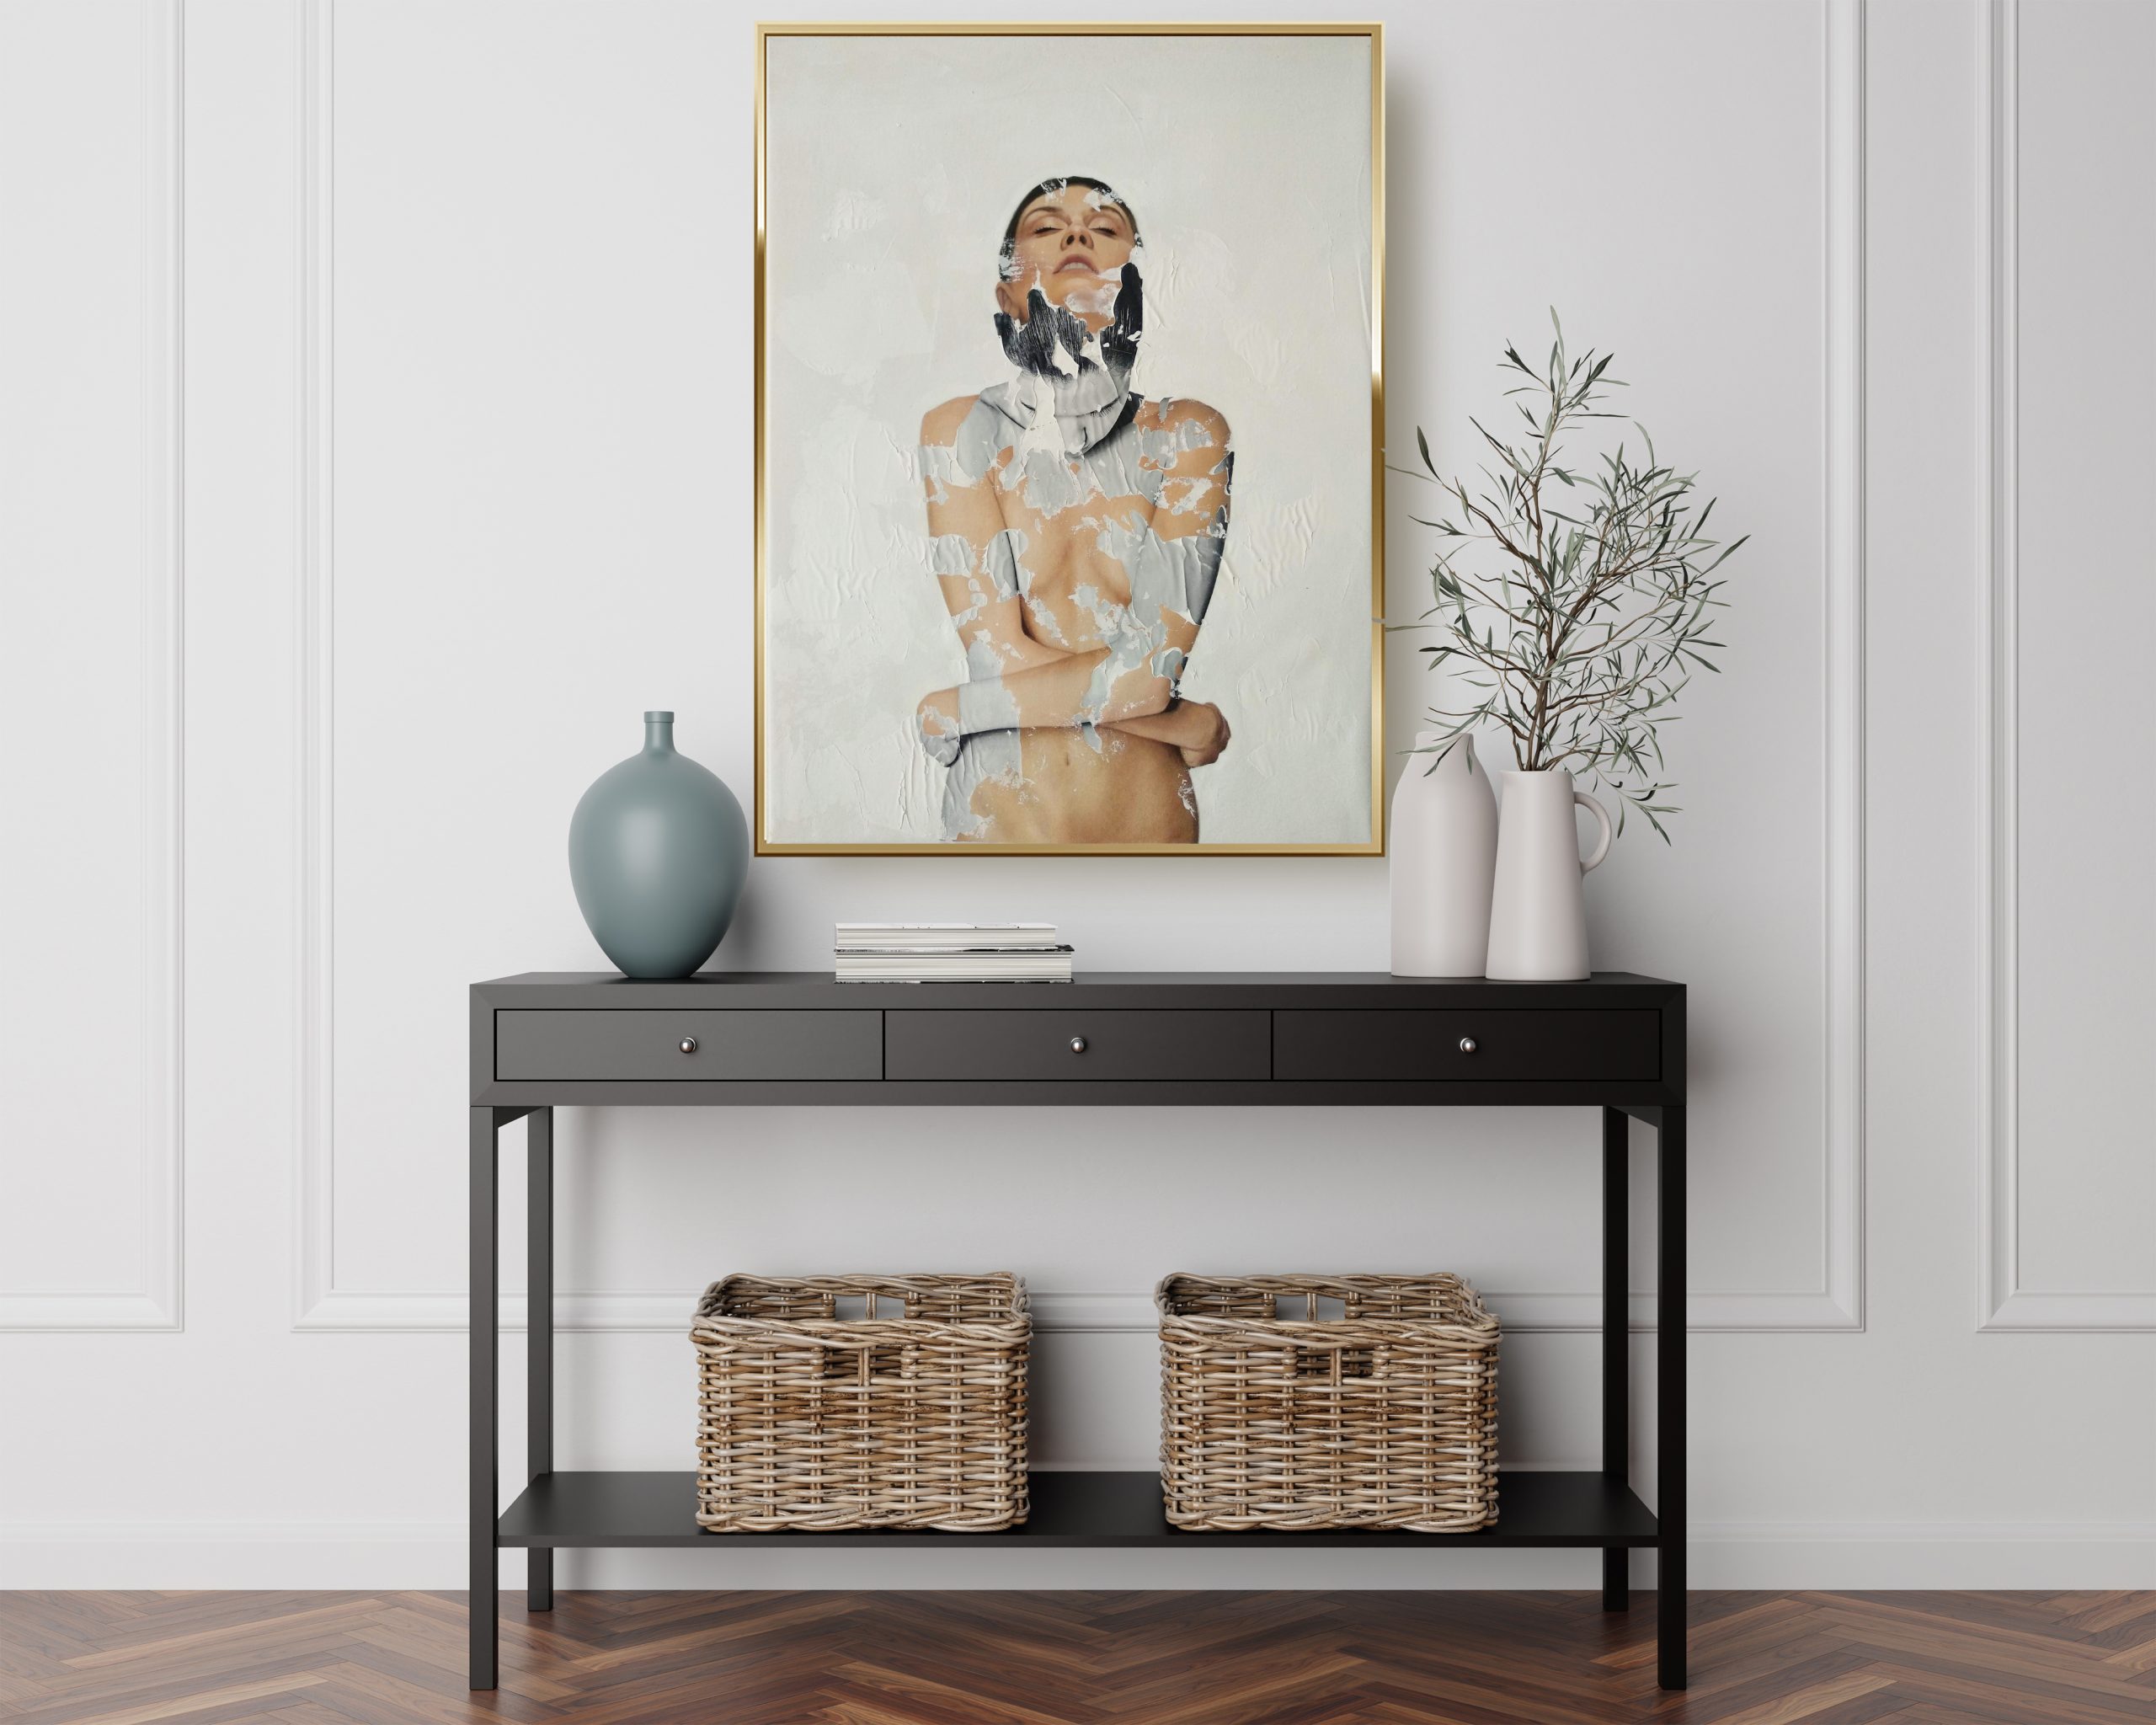 Initium mutationis Raúl Lara mixed media and image transfer on canvas in Neophotorealism style in Wood Console Cabinet Contemporary Modern Foyer Living Room Blank